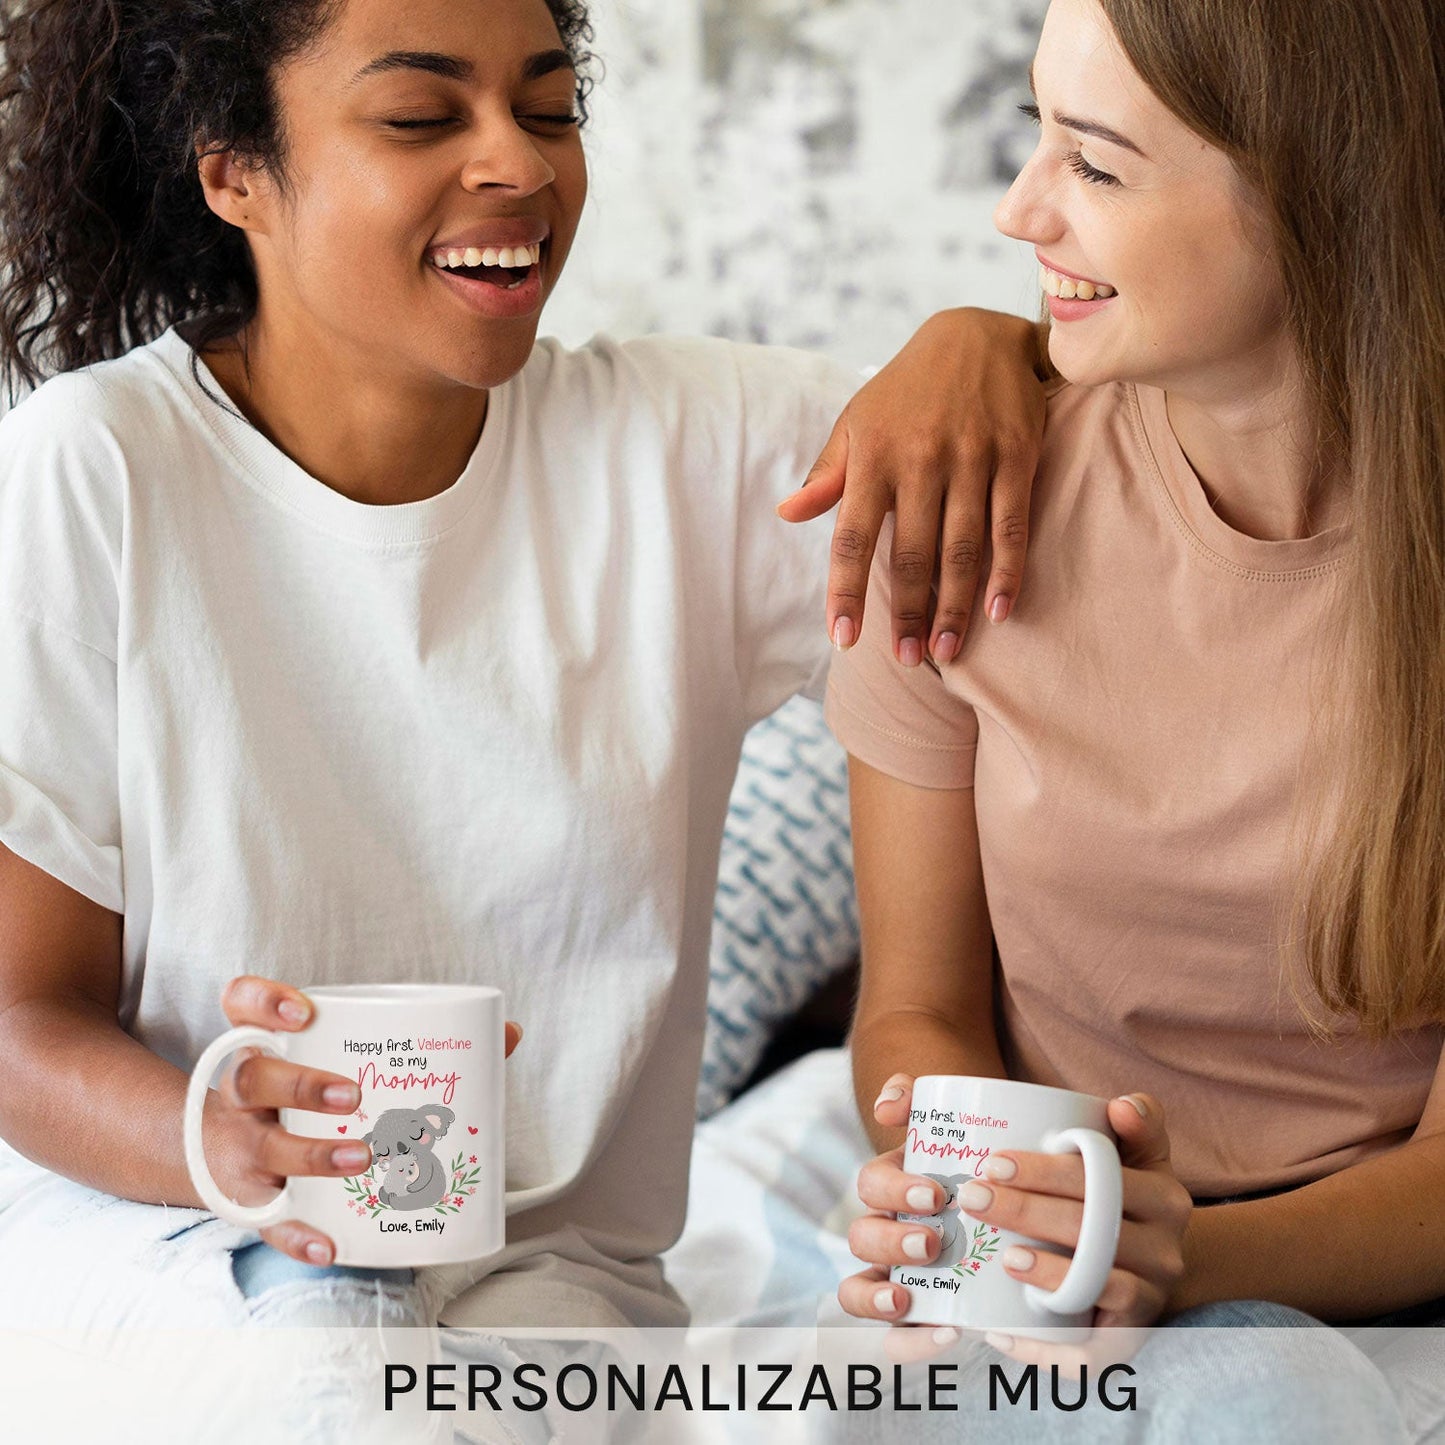 Happy First Valentine As My Mommy - Personalized First Valentine's Day gift For New Mom - Custom Mug - MyMindfulGifts